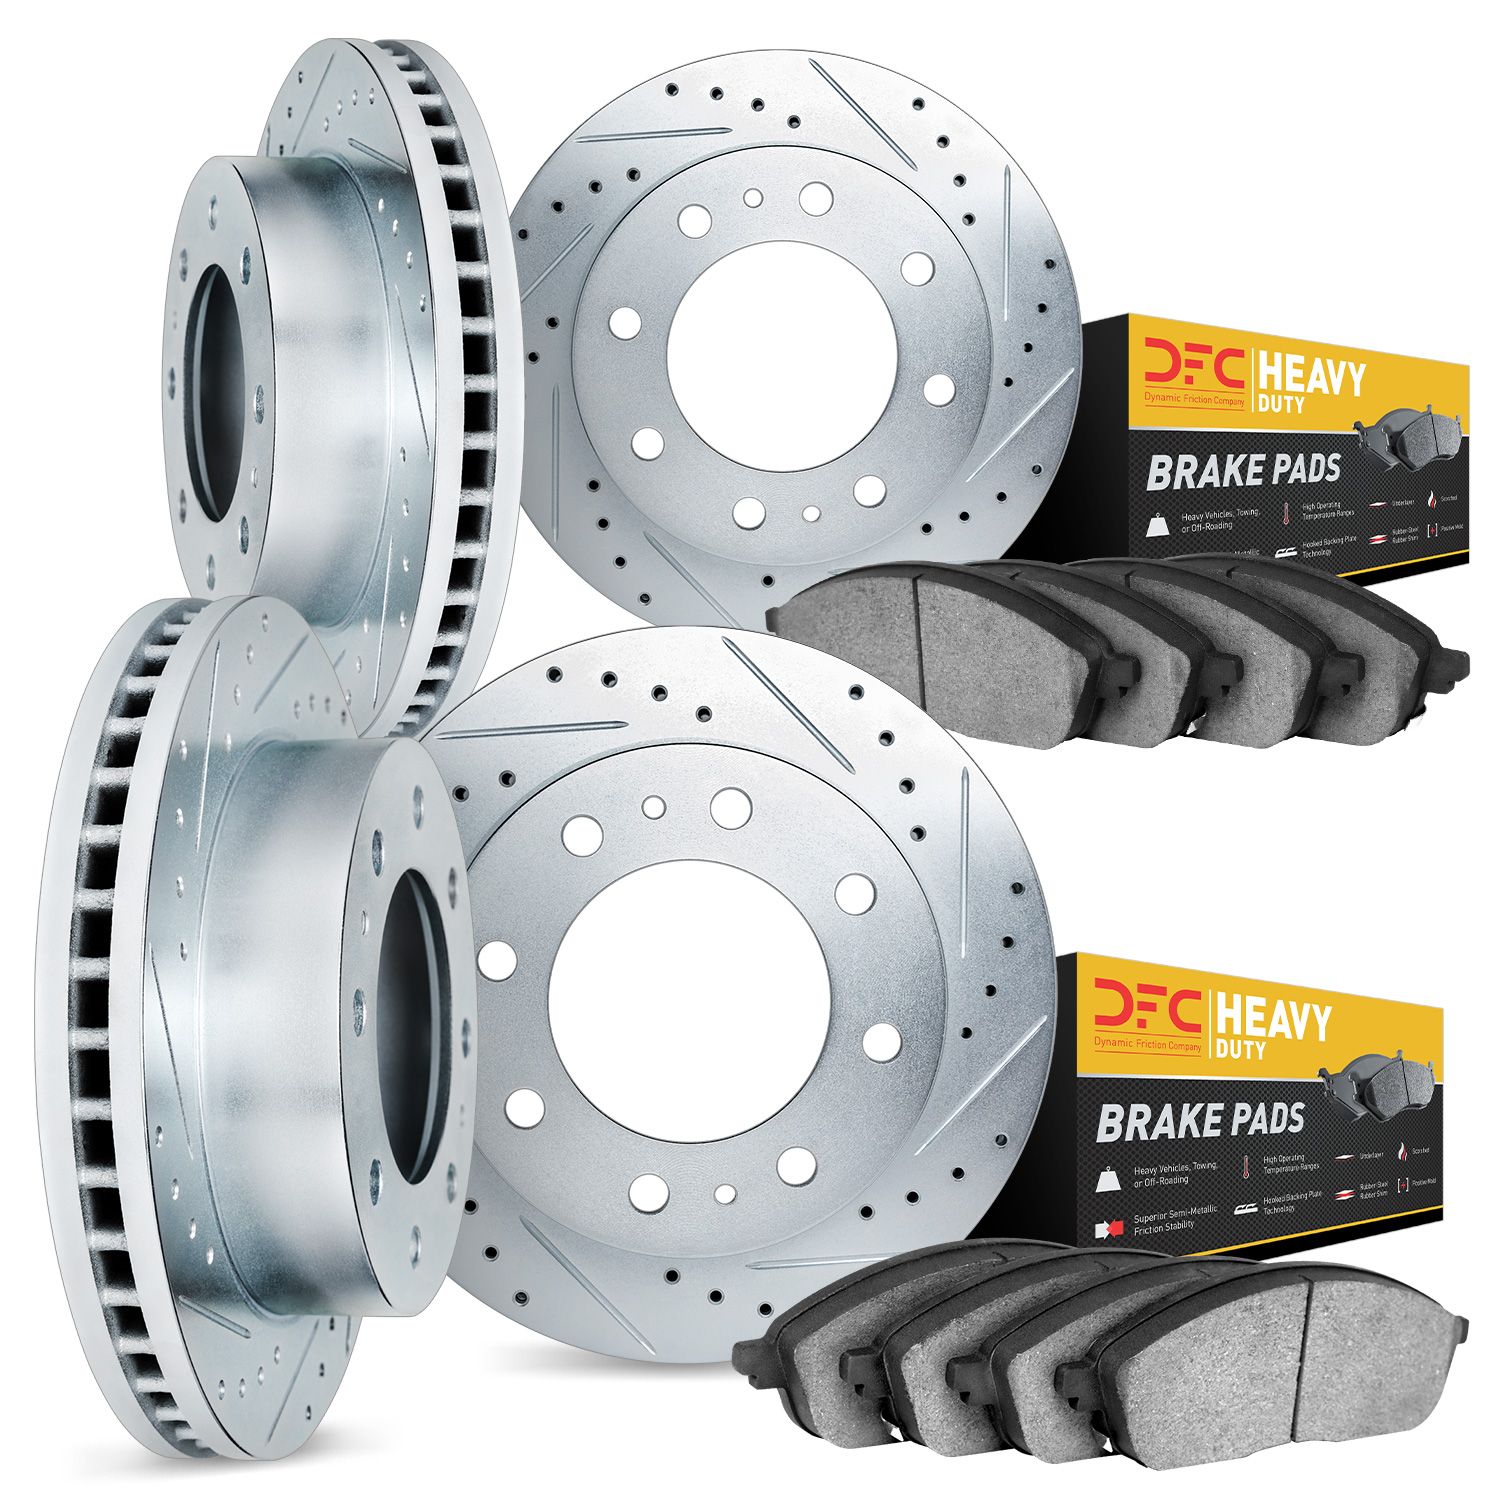 7204-99032 Drilled/Slotted Rotors w/Heavy-Duty Brake Pads Kit [Silver], 1999-2007 Ford/Lincoln/Mercury/Mazda, Position: Front an